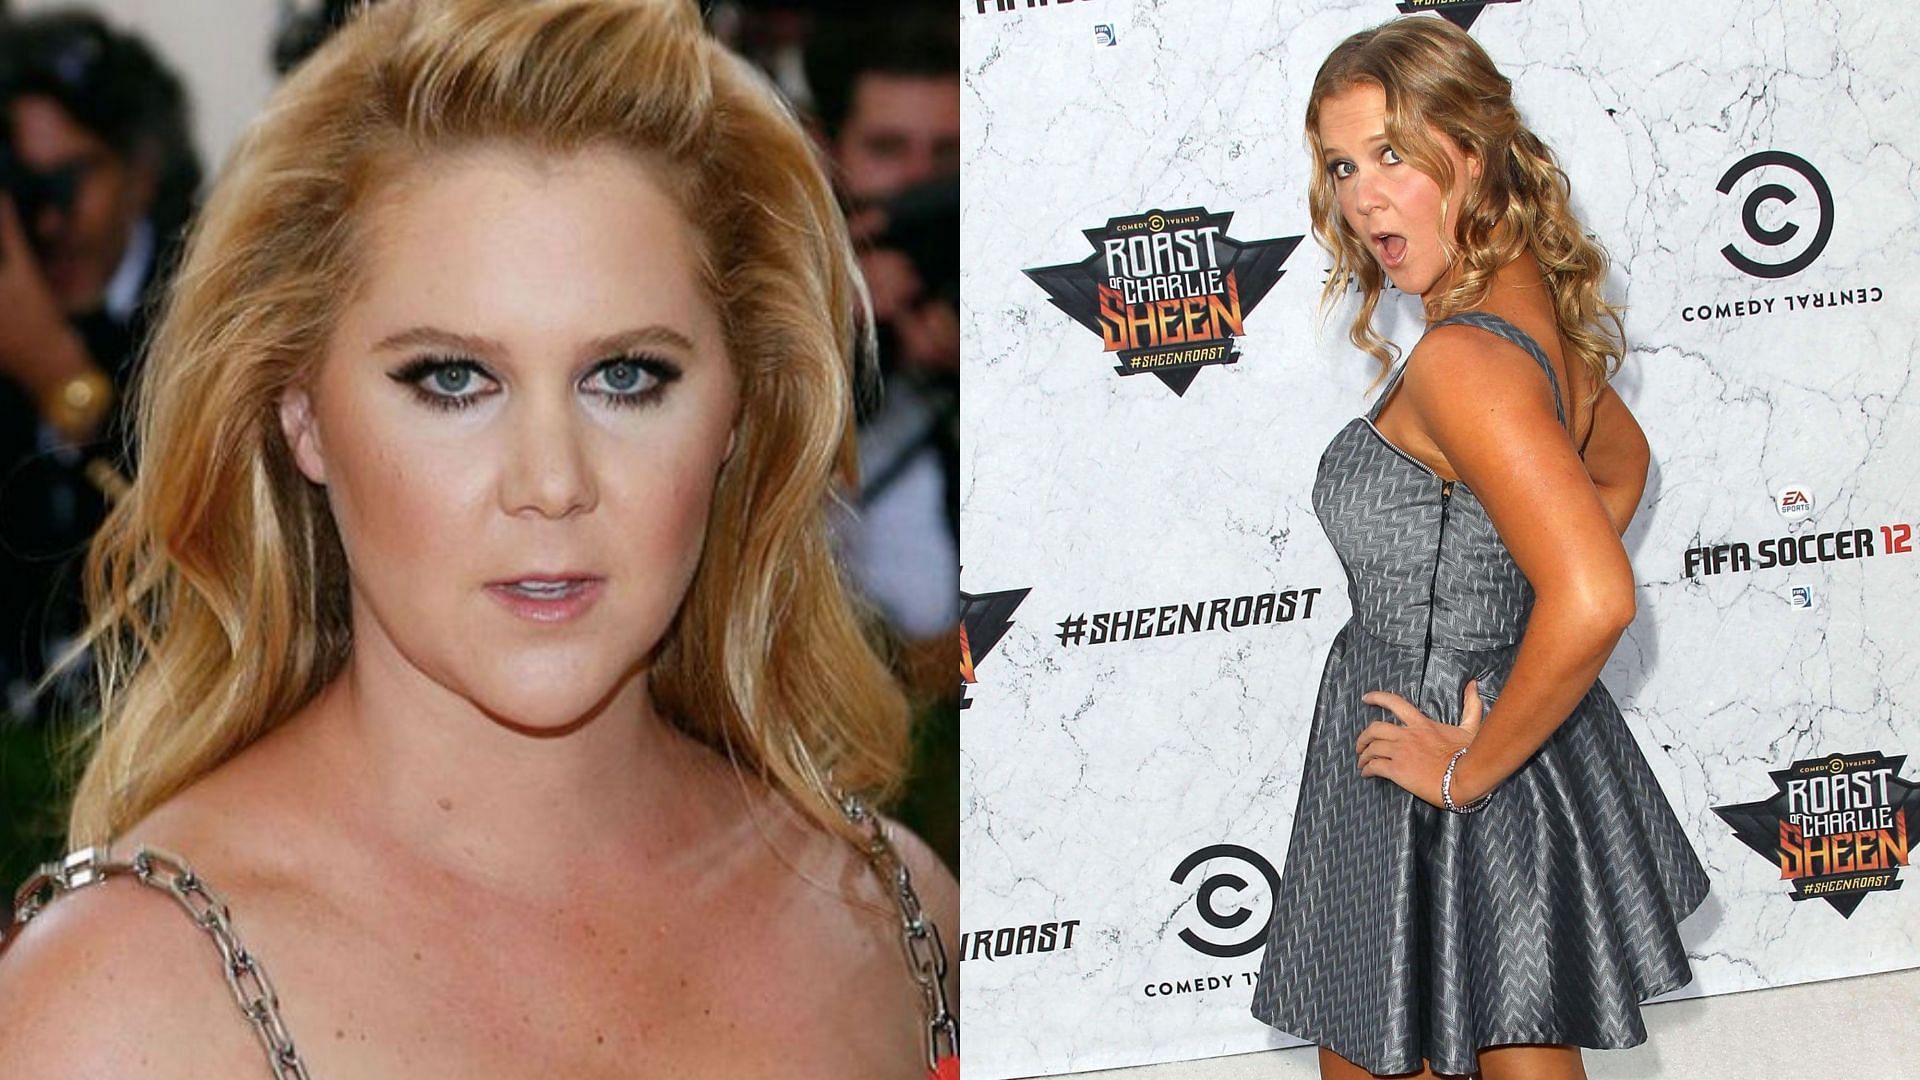 Amy Schumer previously dated WWE Superstar Dolph Ziggler